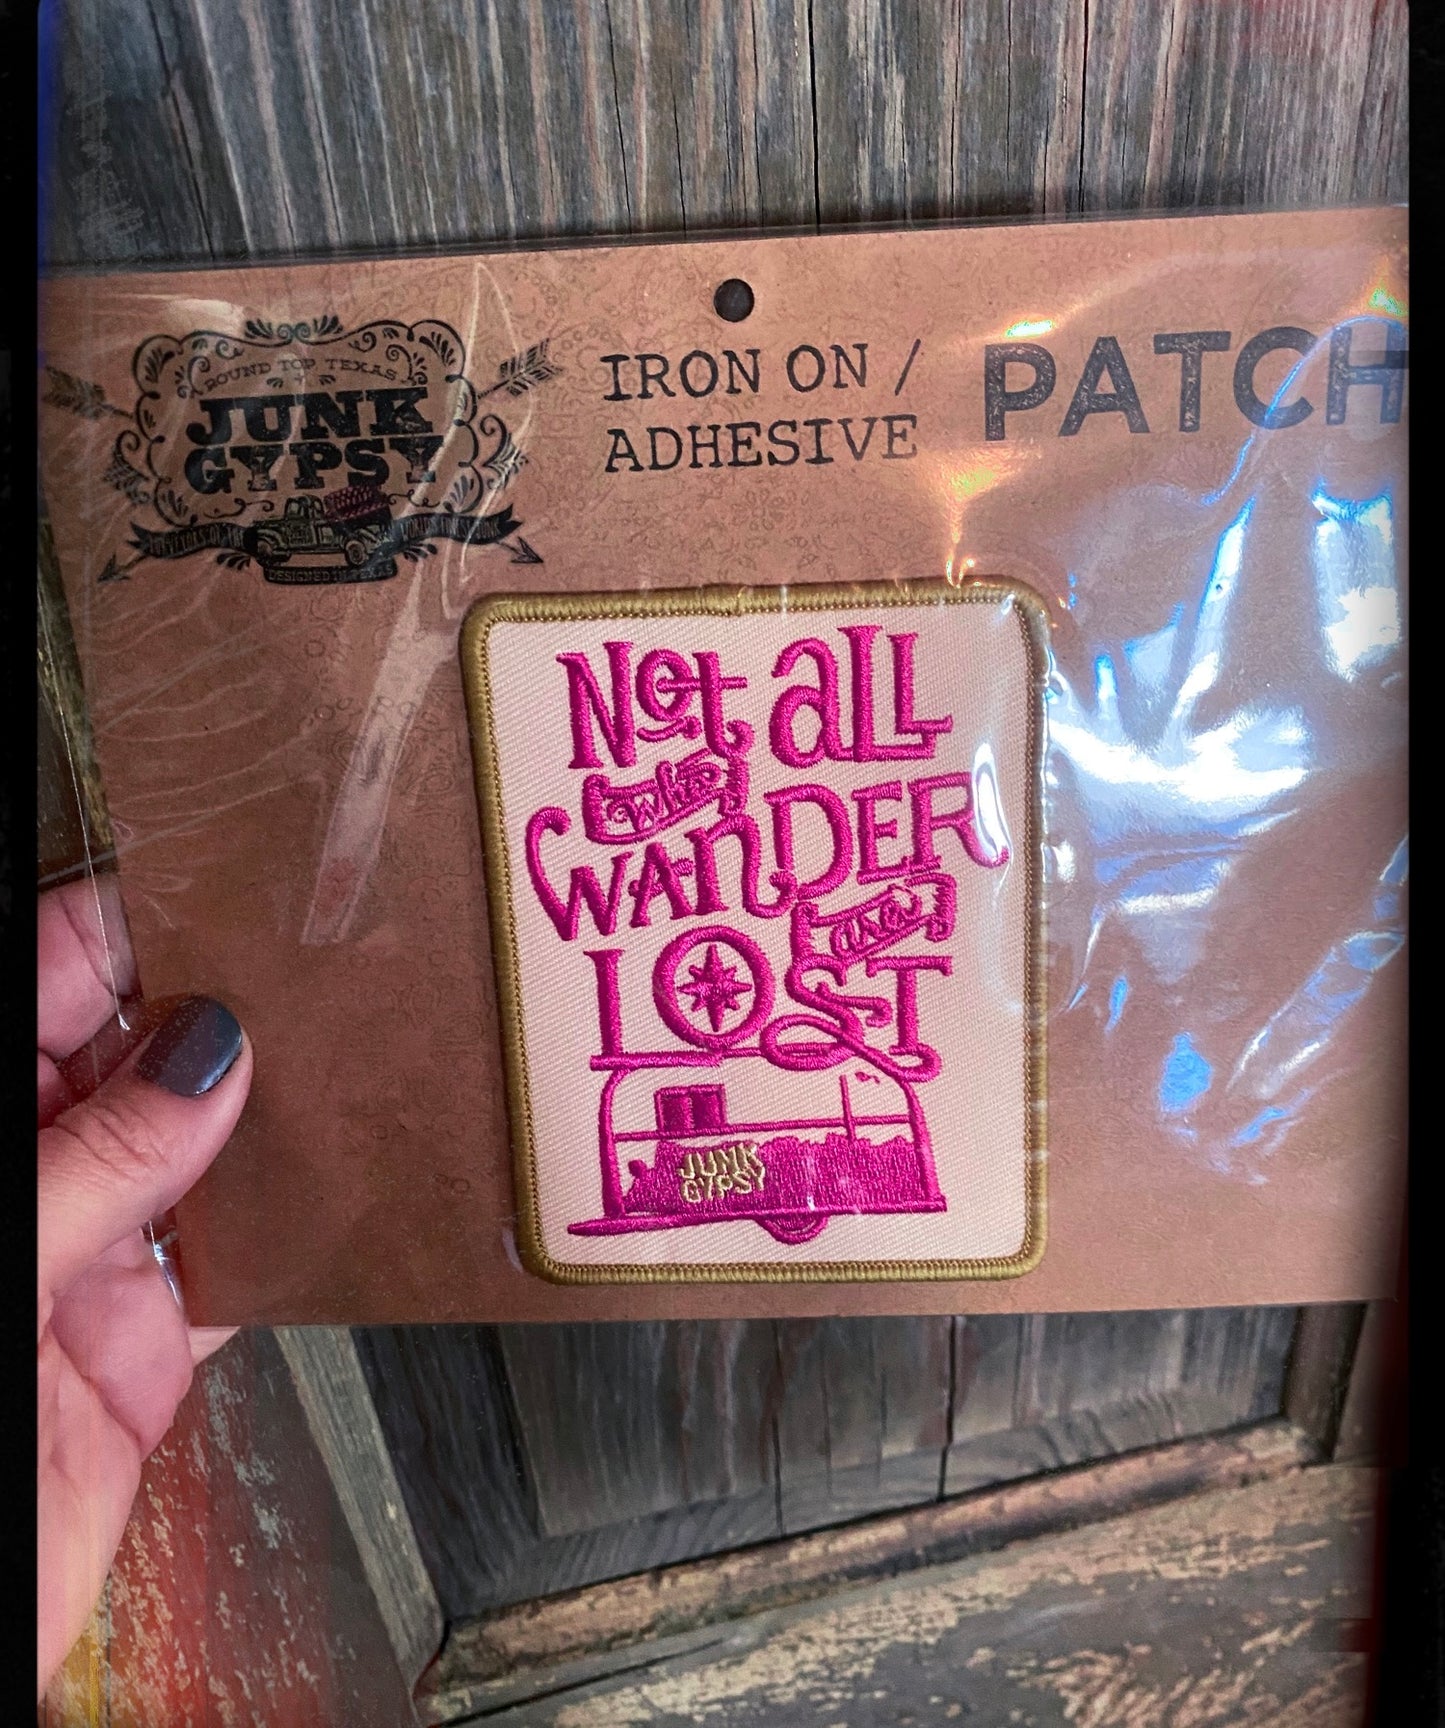 Not all who wander patch